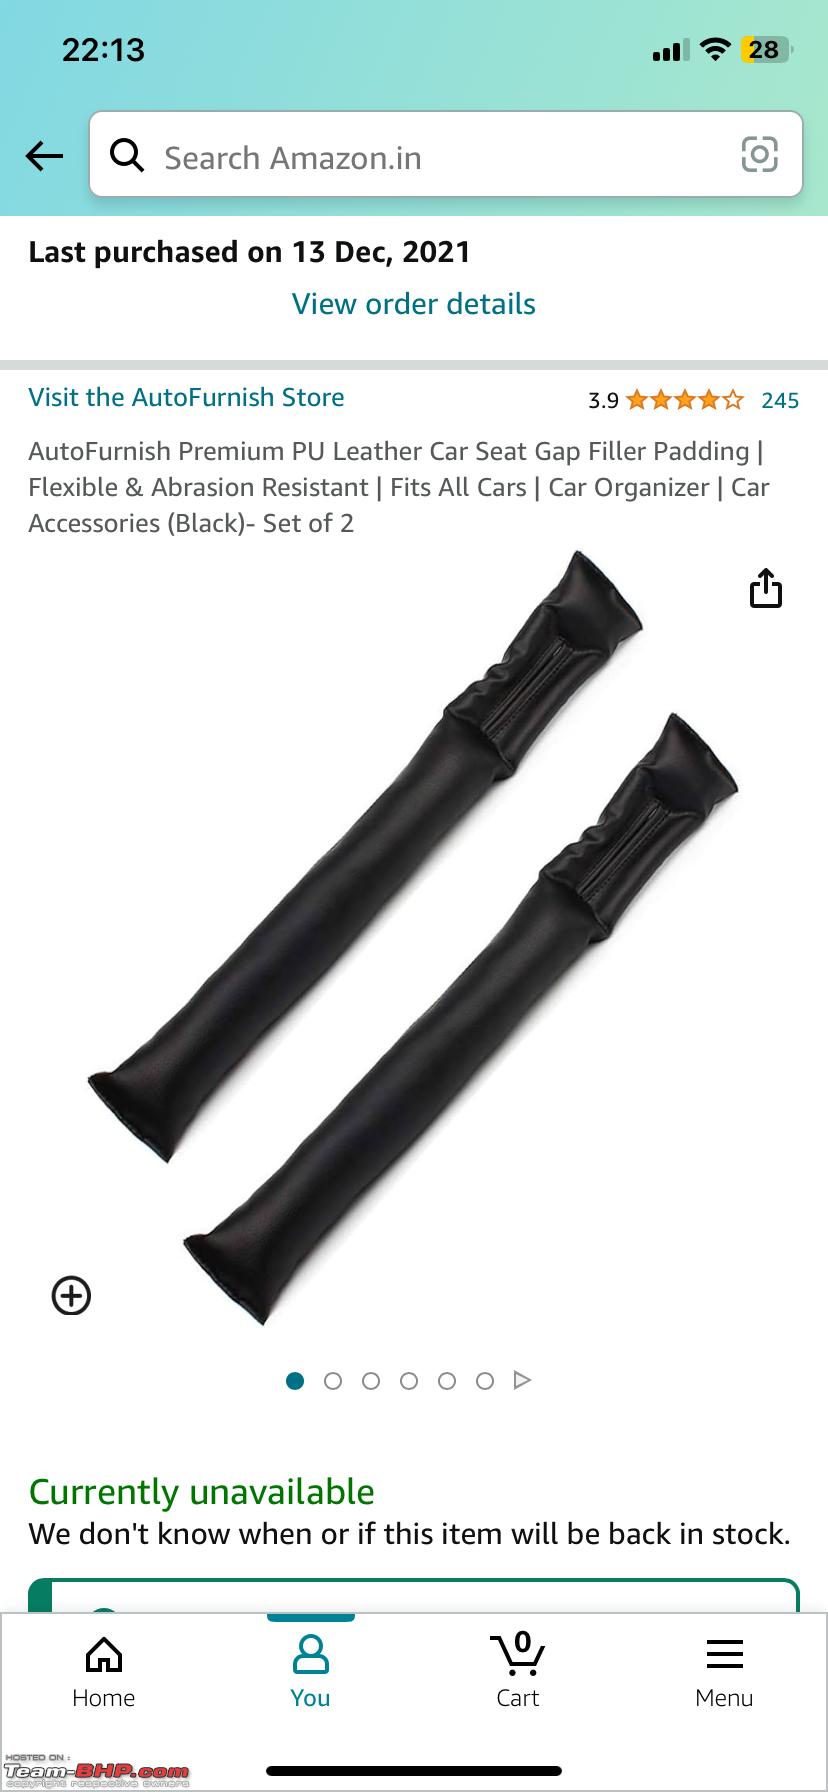 https://www.team-bhp.com/forum/attachments/modifications-accessories/2551698d1703954887-2023-edition-your-must-have-car-accessories-today-img_9346.png